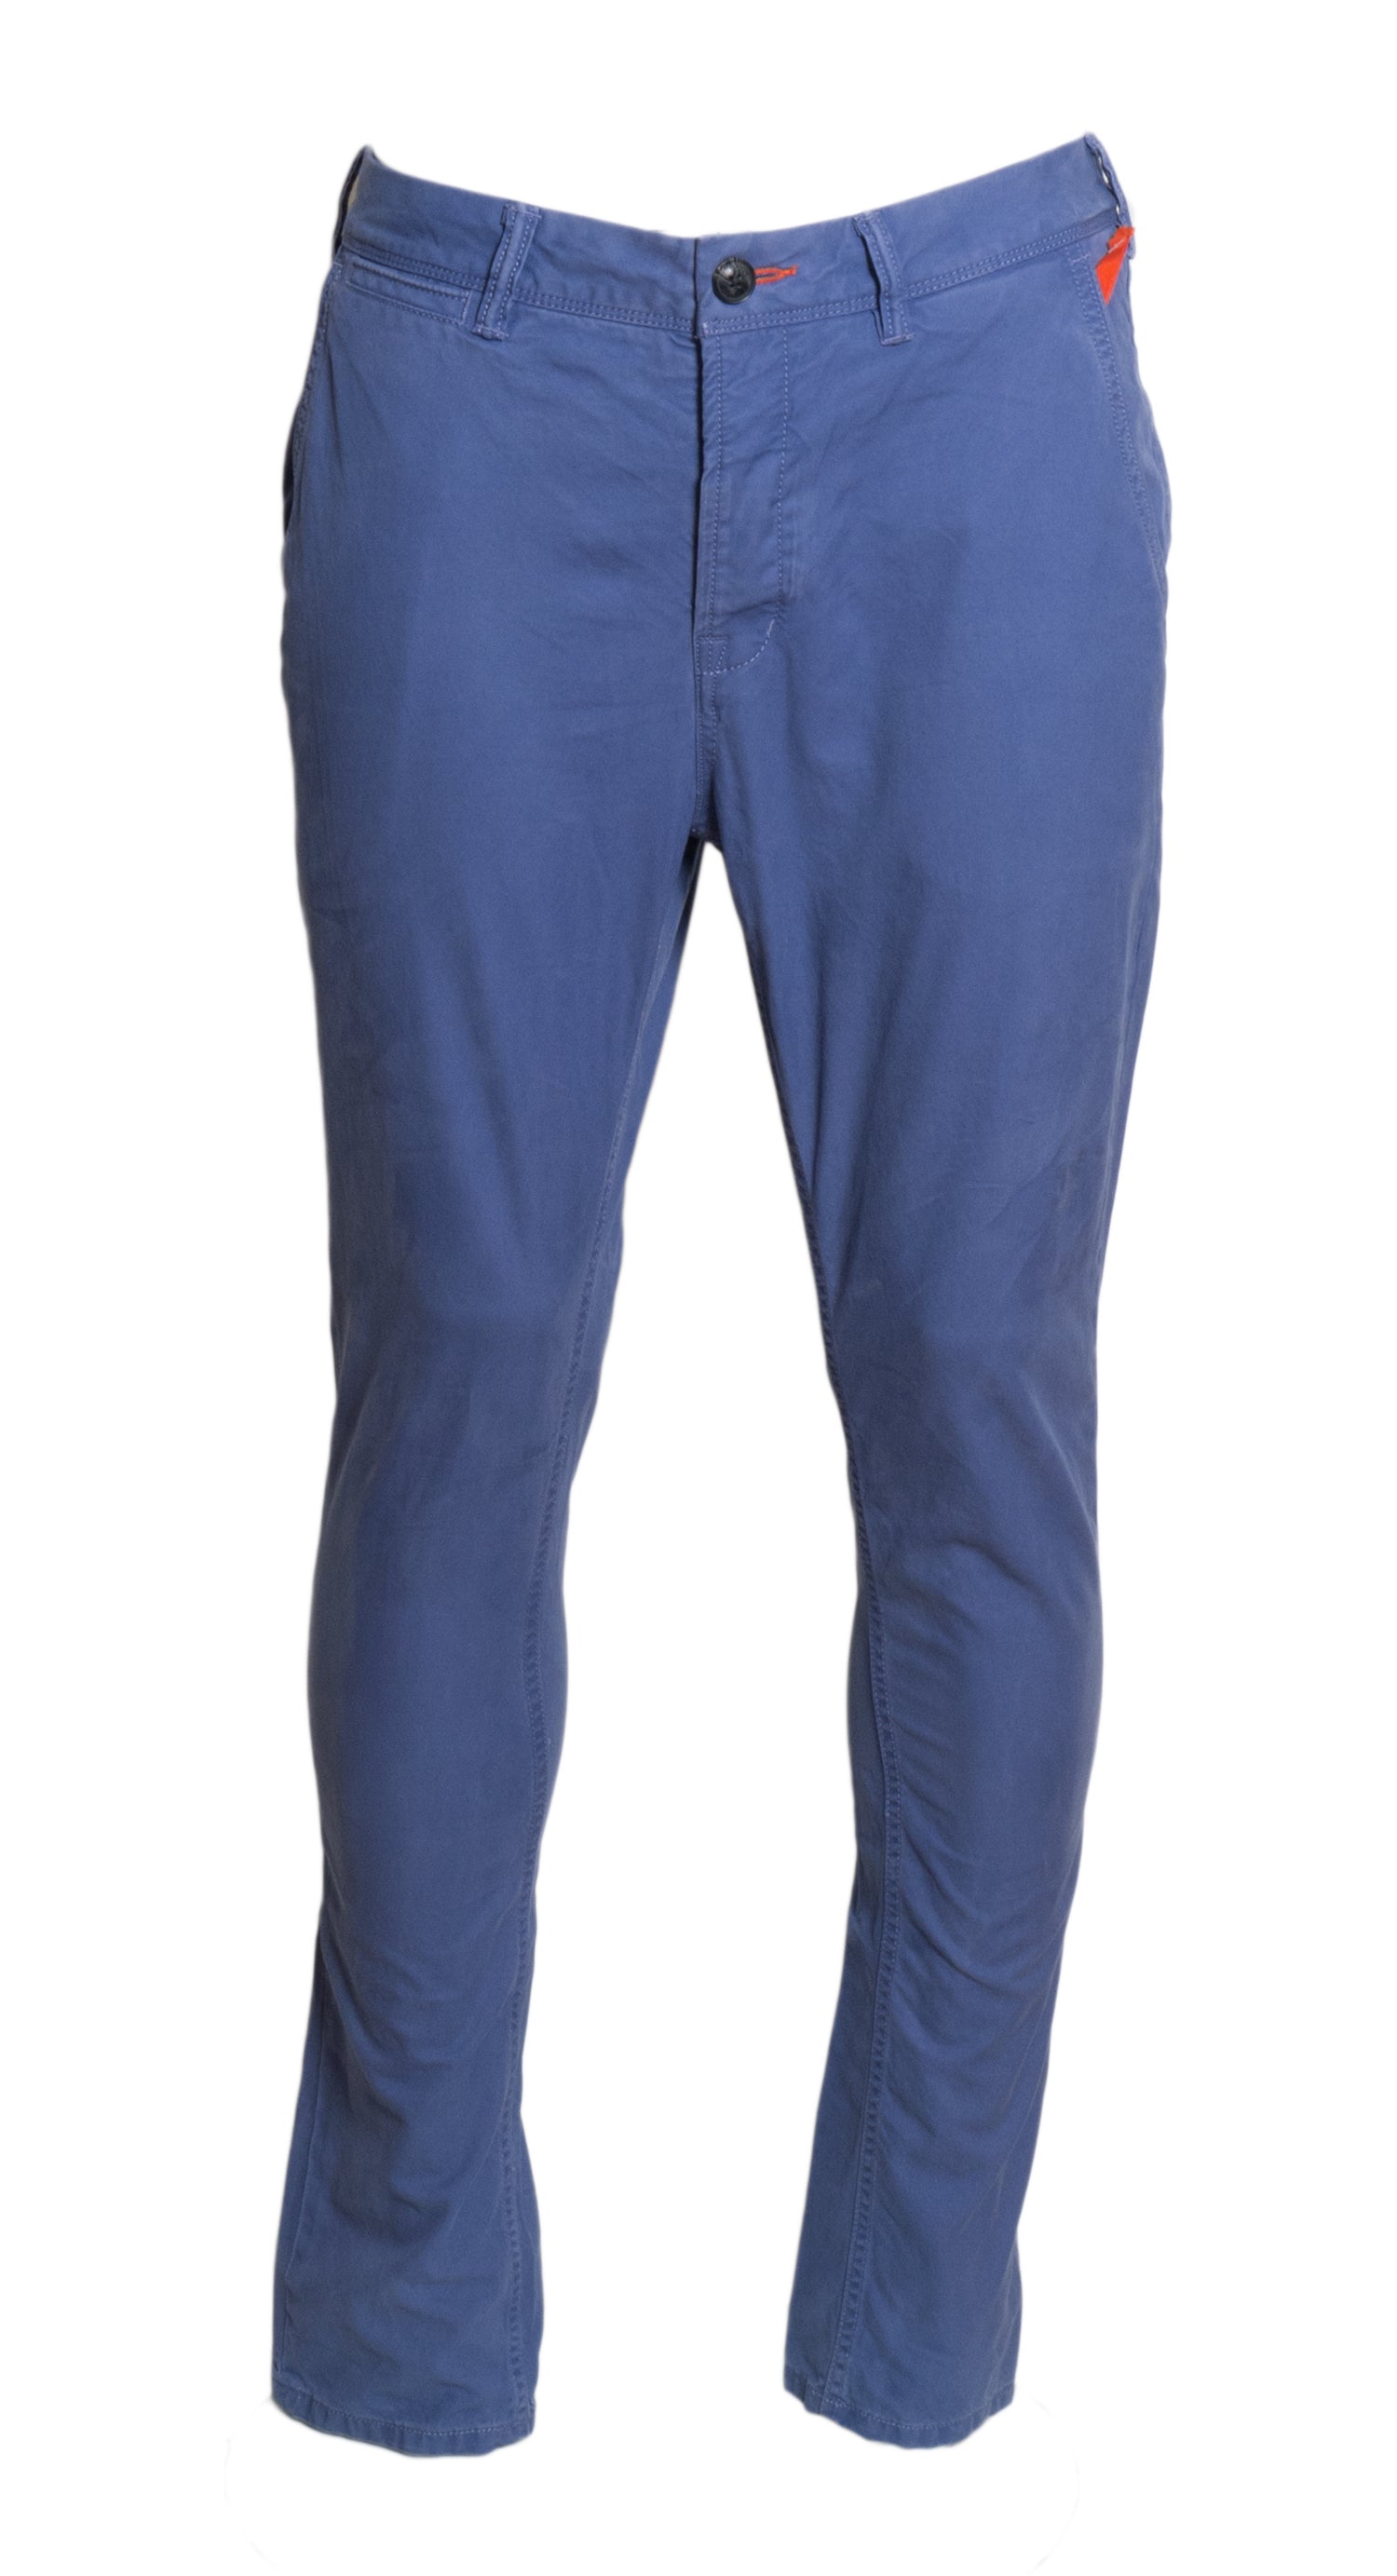 Rookie Chinos Trouser By Superdry - Spirit Clothing